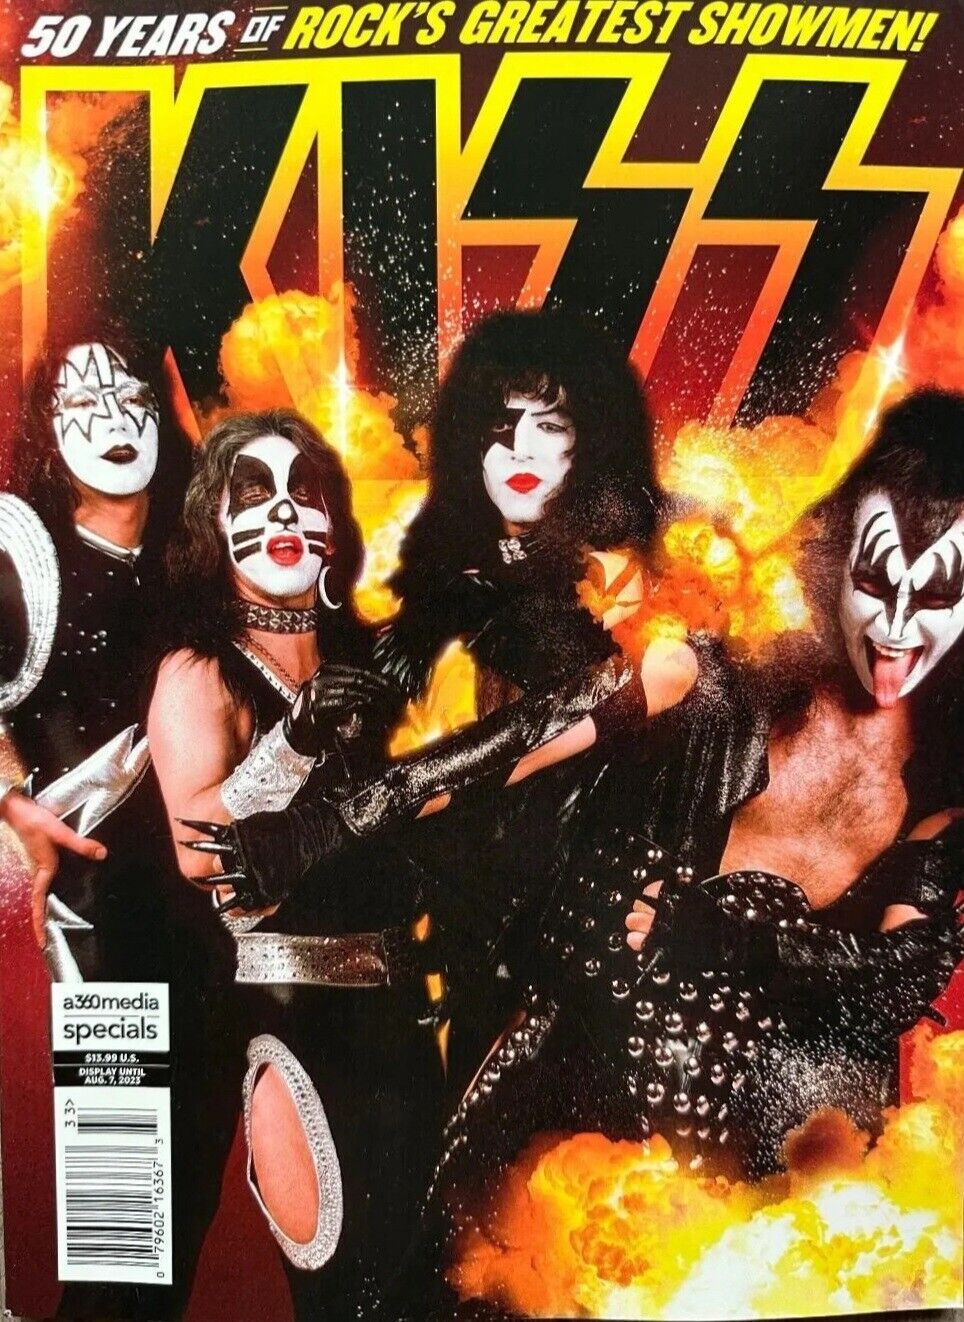 KISS - 50 YEARS OF ROCK'S GREATEST SHOWMEN MAGAZINE - 2023 (US Customers Only)